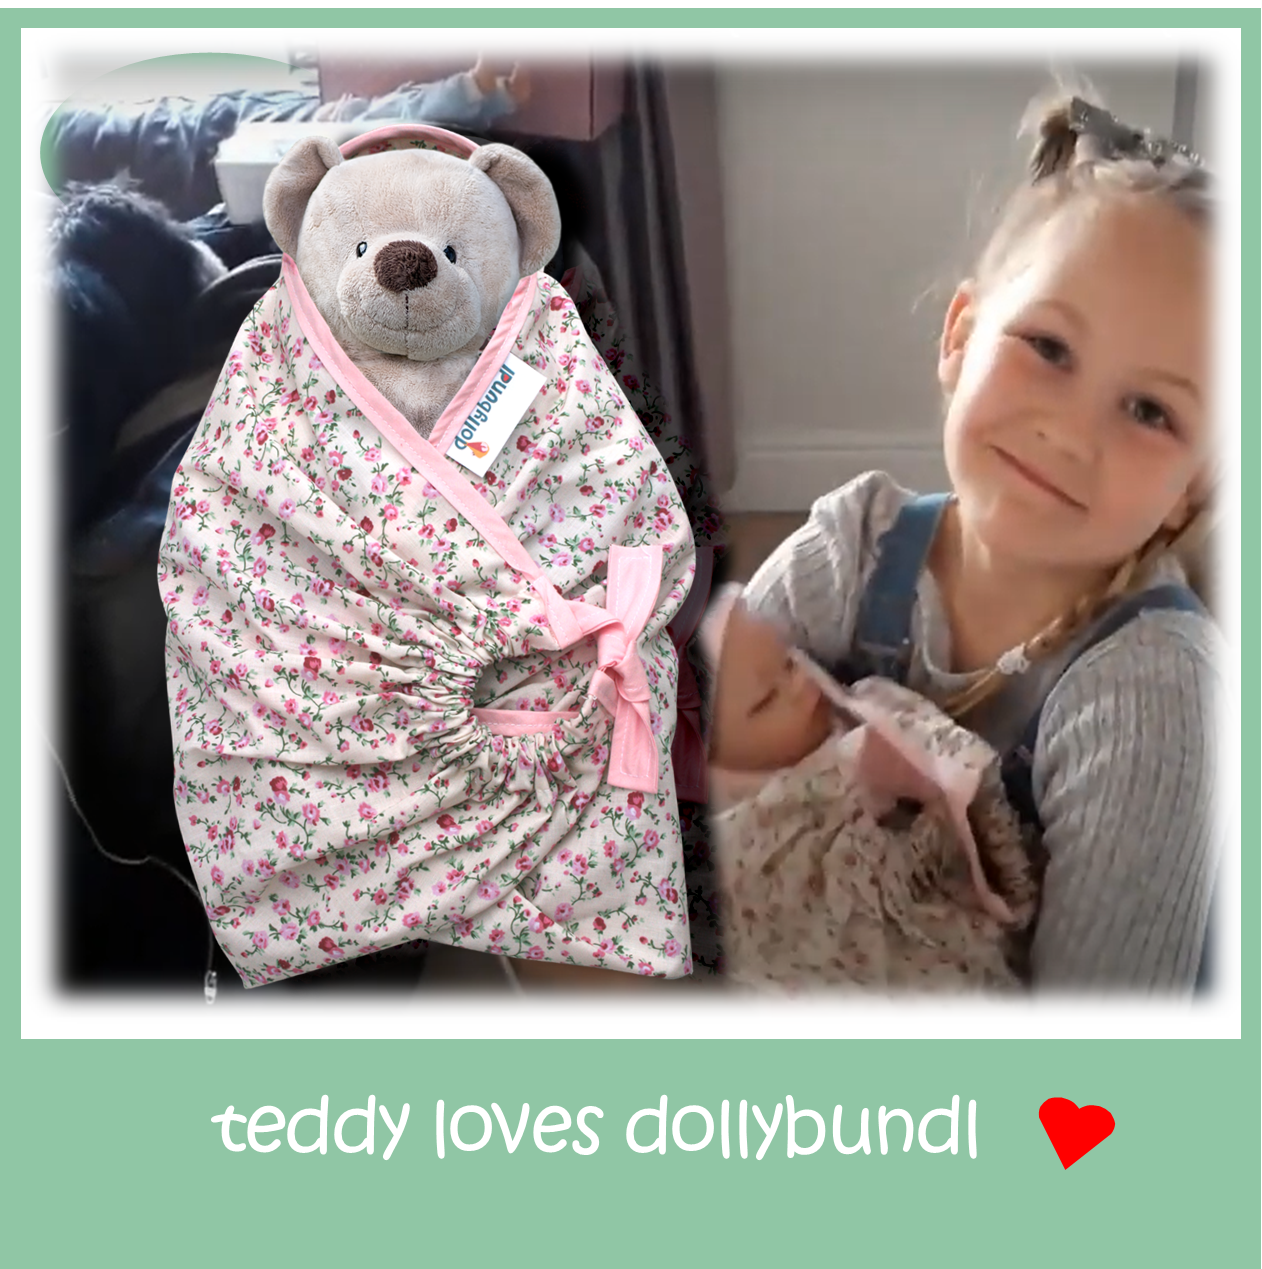 Dollybundl - The Toy Dollybundl for Dollies and Teddys     * SORRY BUT THIS PRODUCT IS ONLY AVAILABLE IN THE UK AND OUT OF STOCK IN THE USA